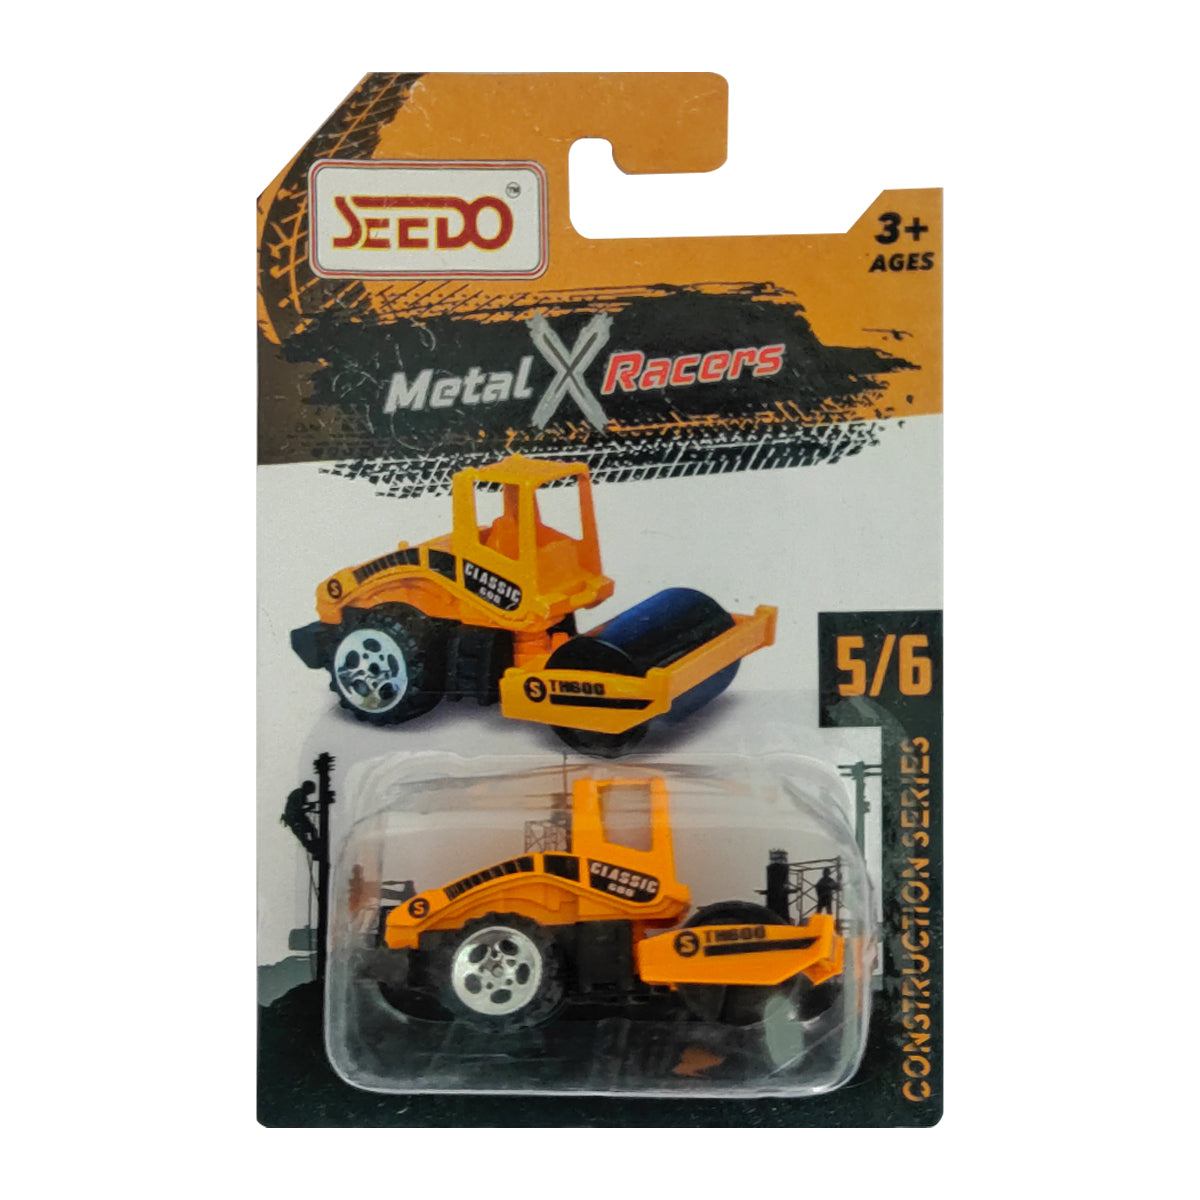 Seedo Metal X Racers Construction Series Die Cast Car for Ages 3+, Pack Of 6